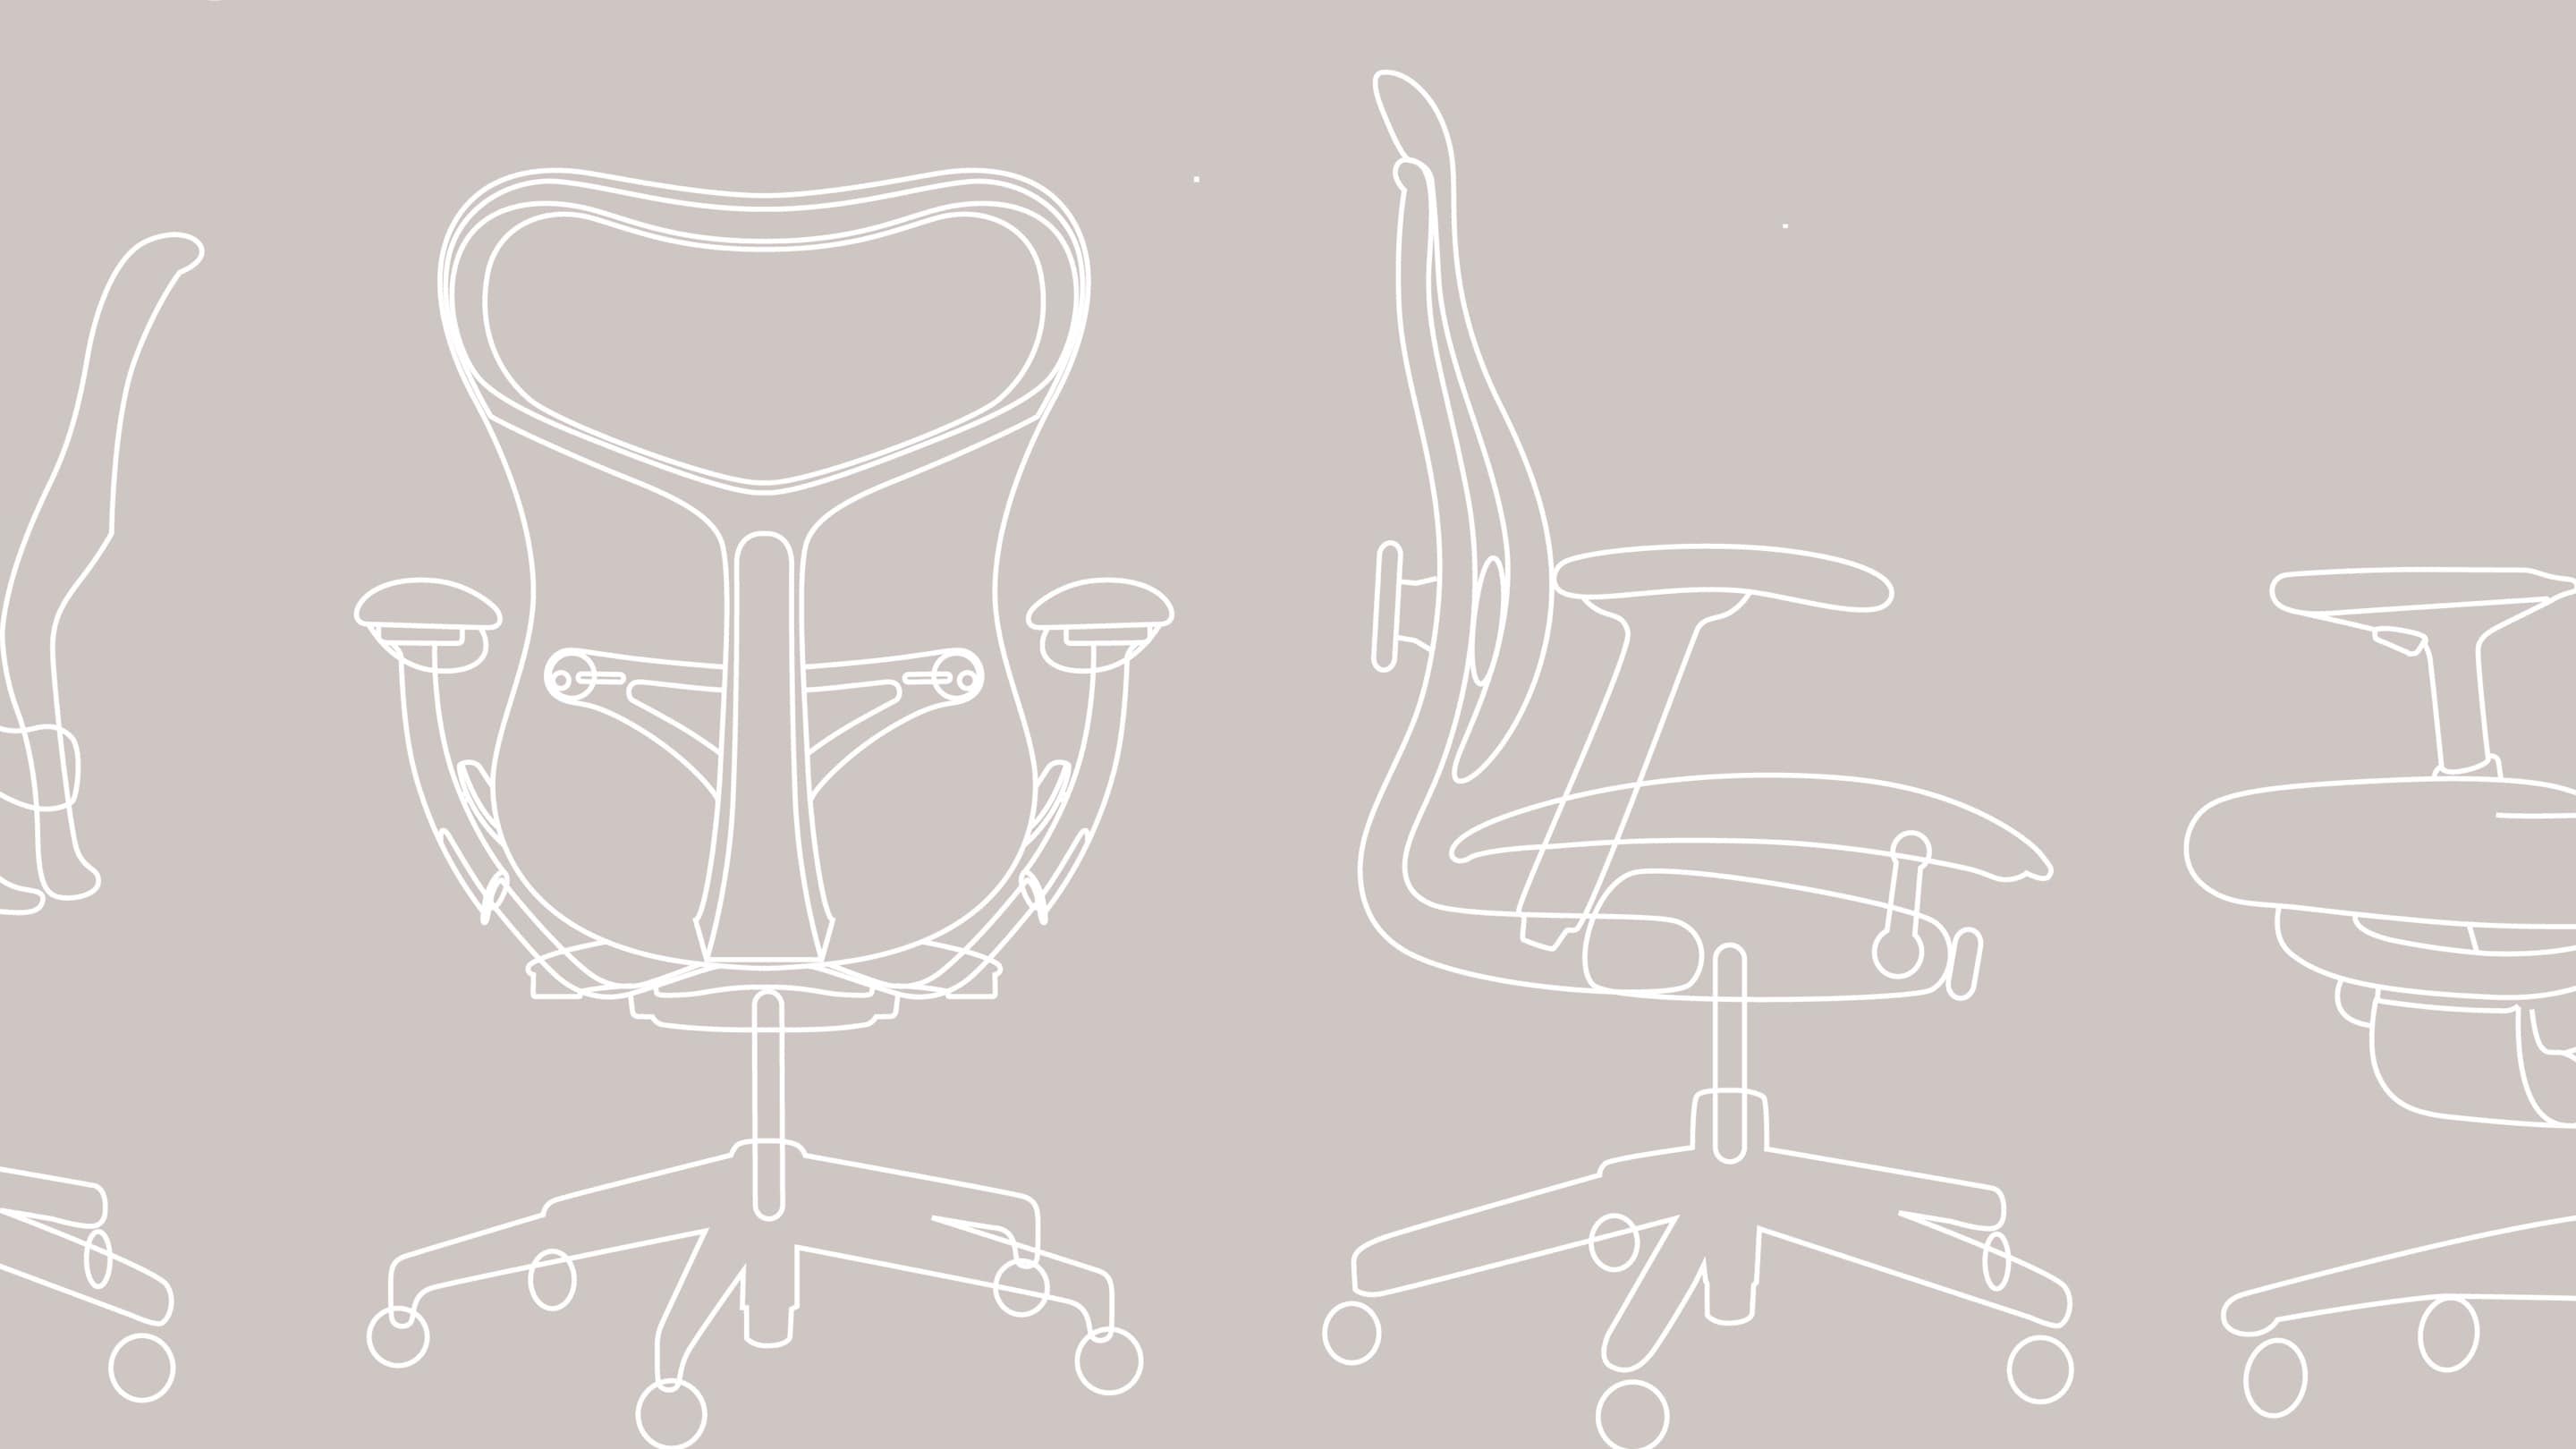 What Makes a Chair Ergonomic? - Human Solution